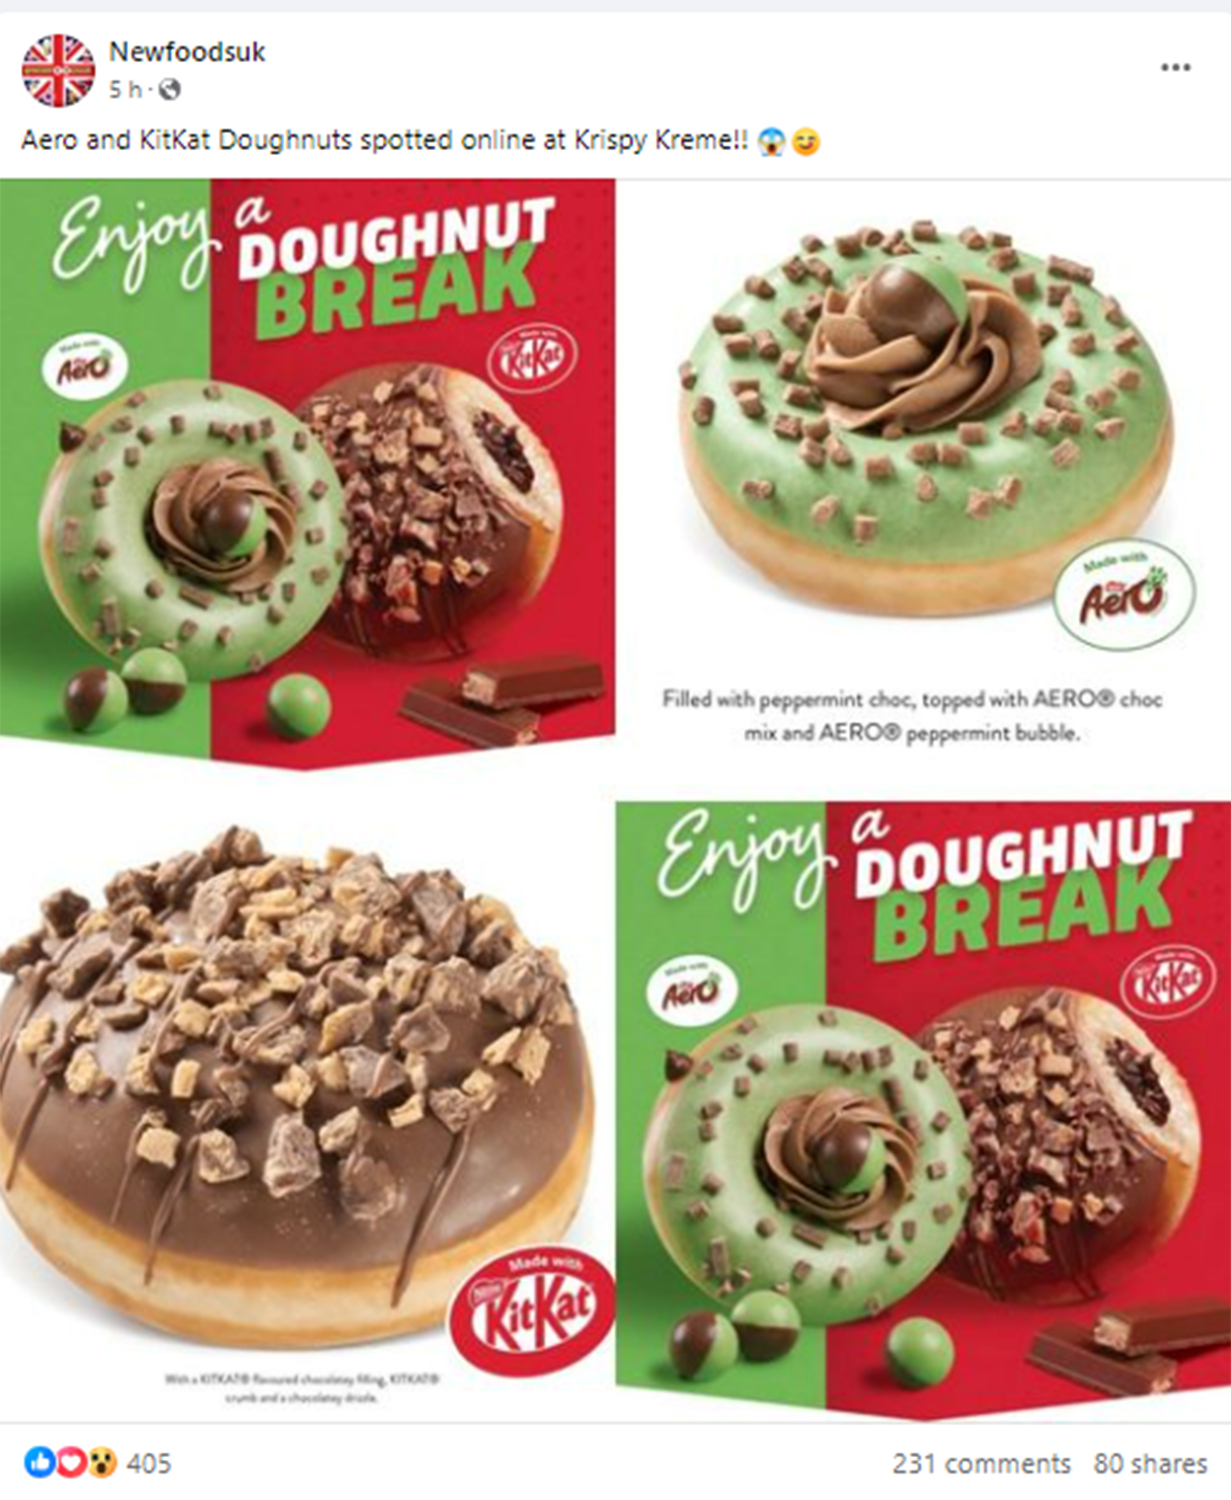 ‘We NEED these’ cry Nestle fans racing to fill their trolleys with ‘tasty’ doughnut inspired by two iconic brands